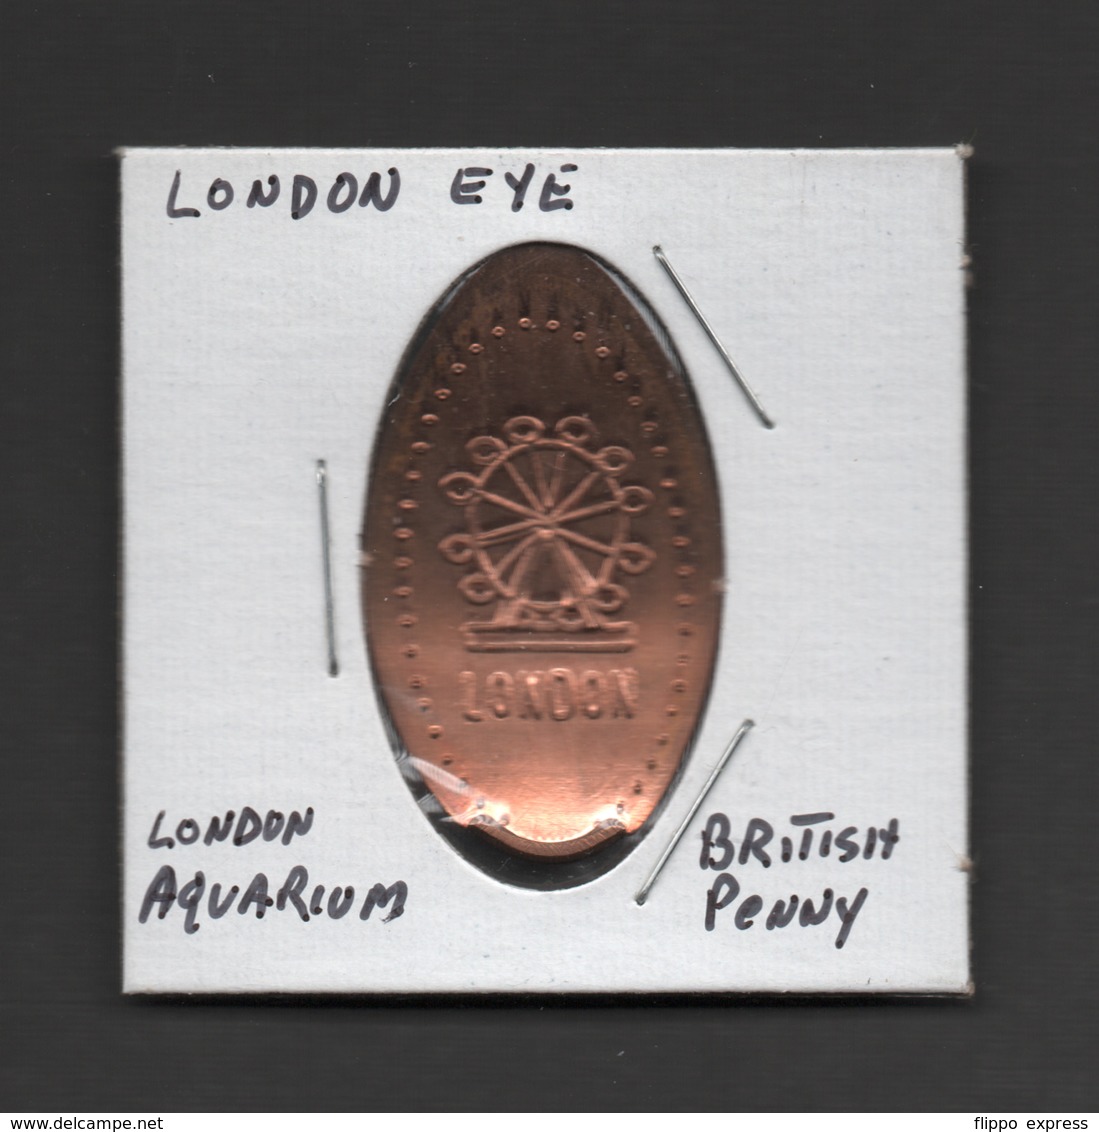 Pressed Penny, Elongated Coin, London Eye, England - Monete Allungate (penny Souvenirs)